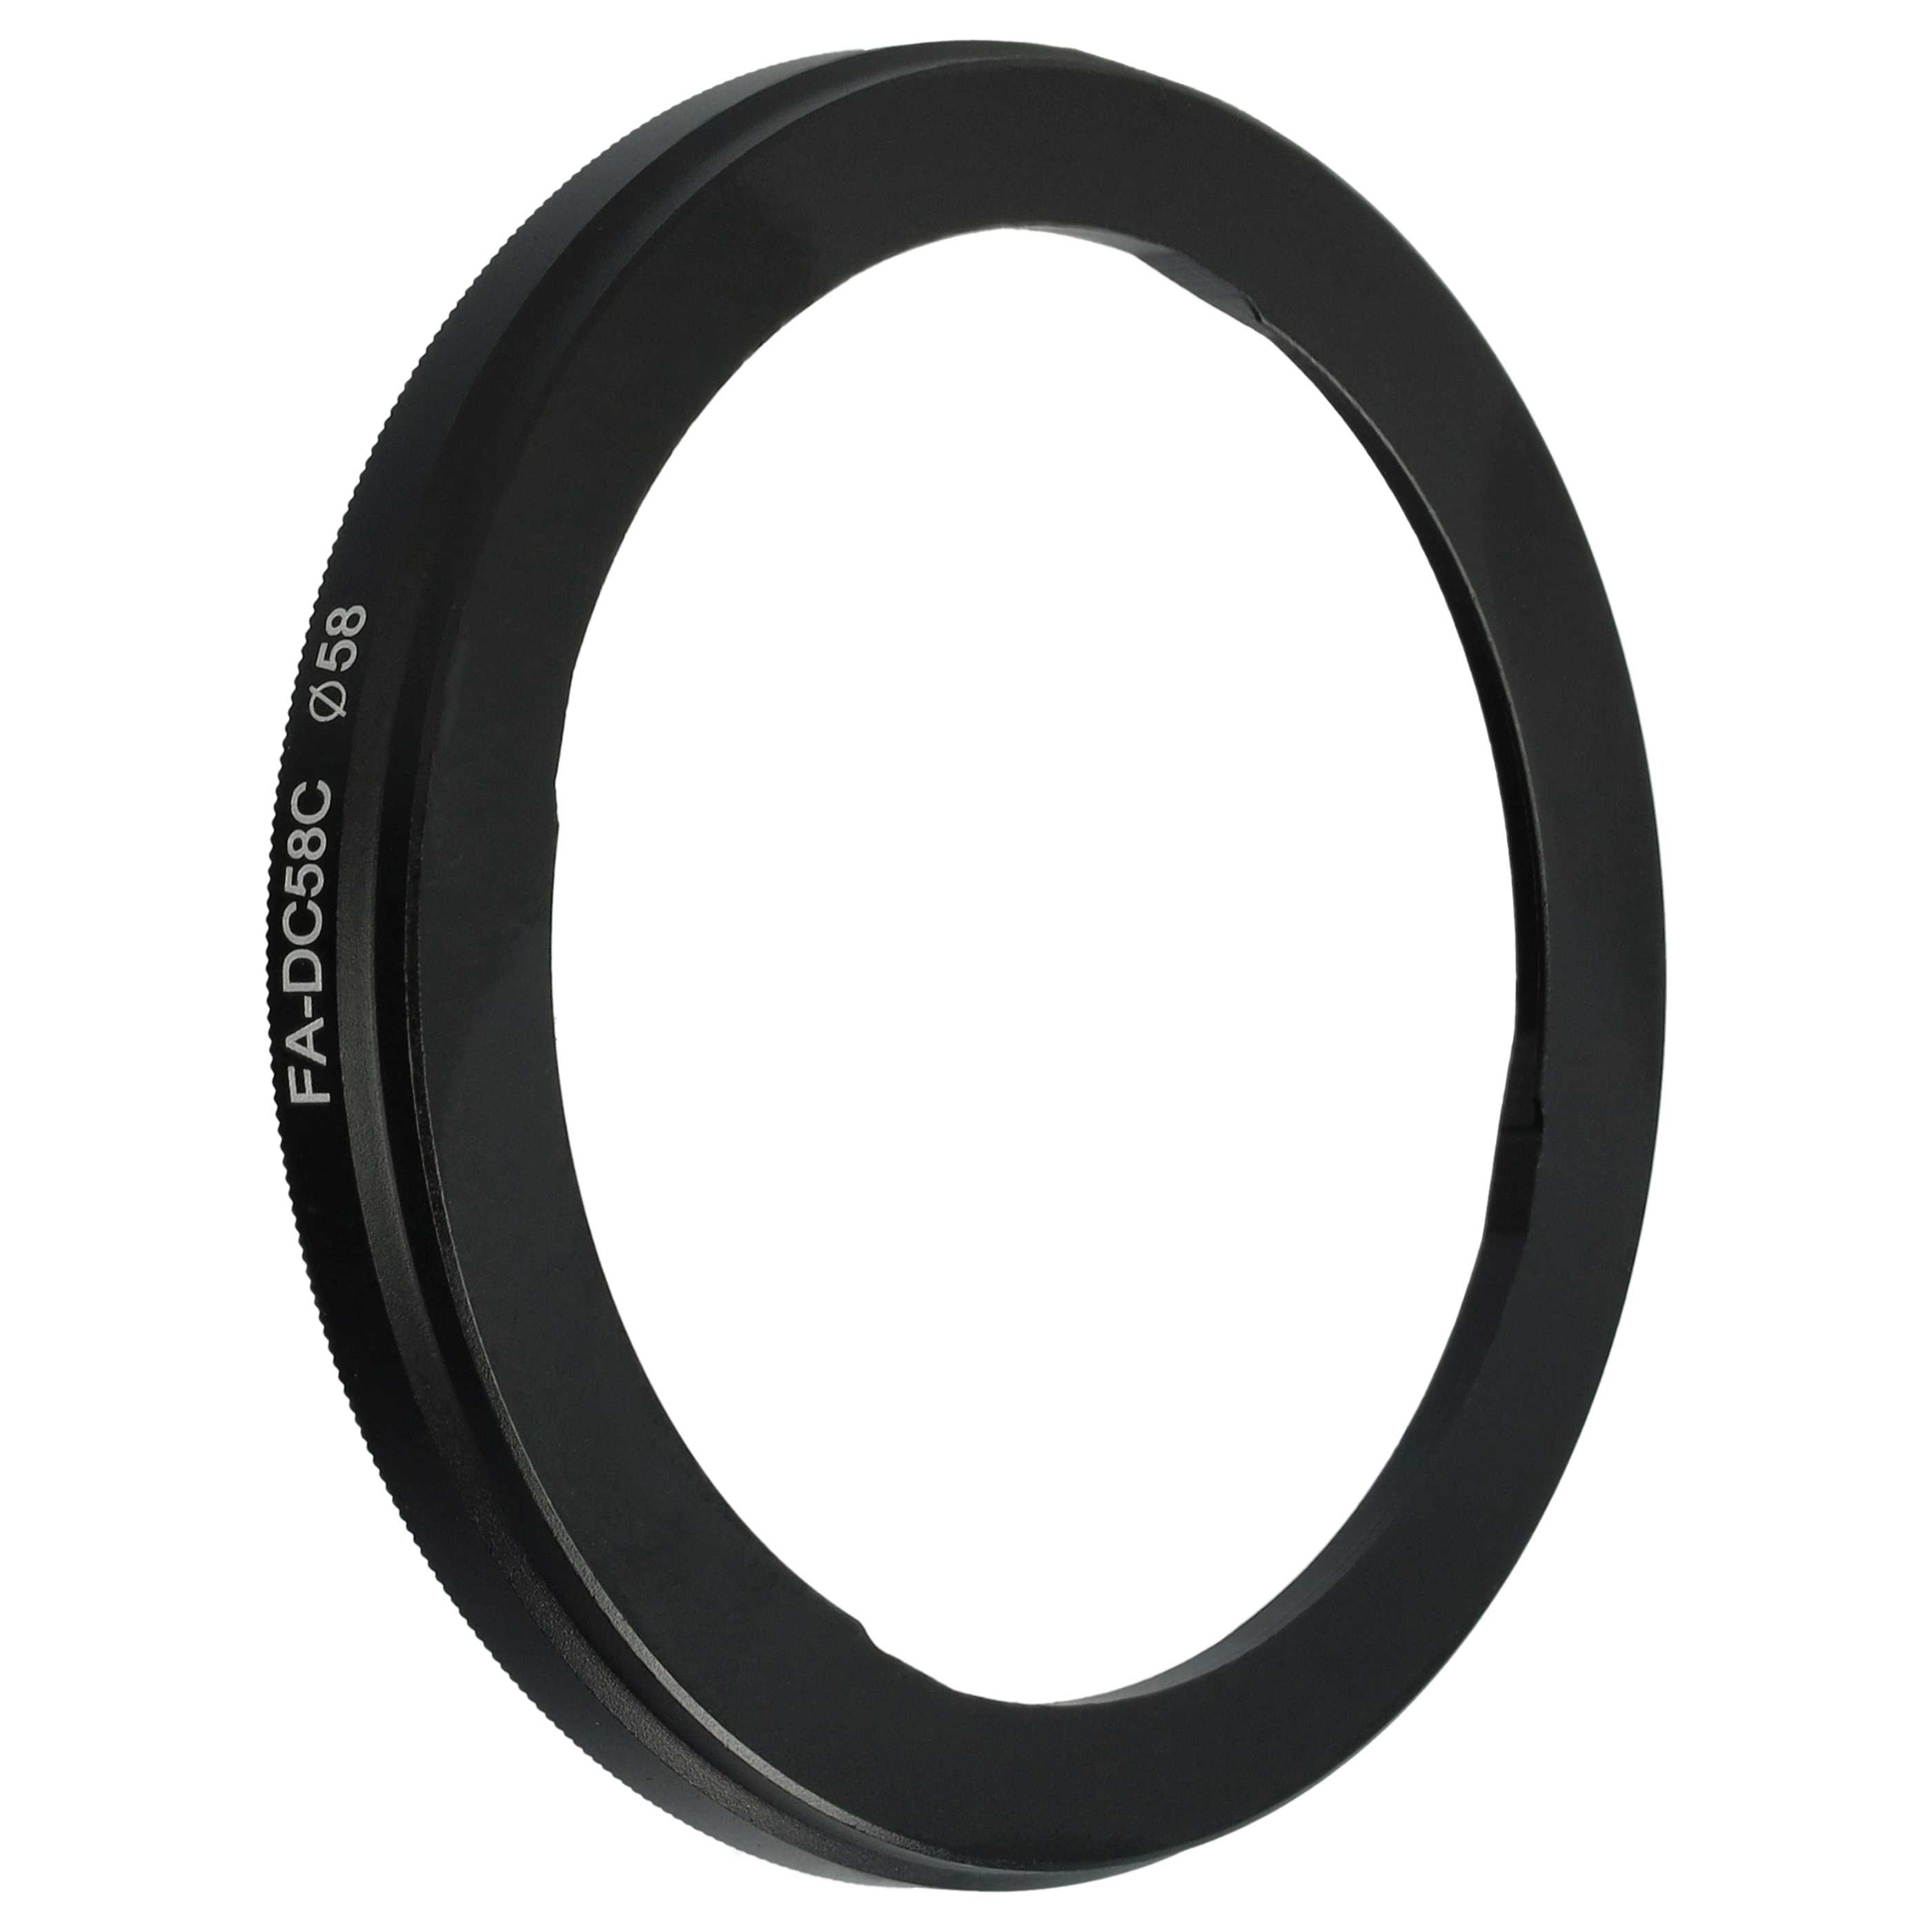 Filter Adapter replaces Canon FA-DC58C for Camera Lens